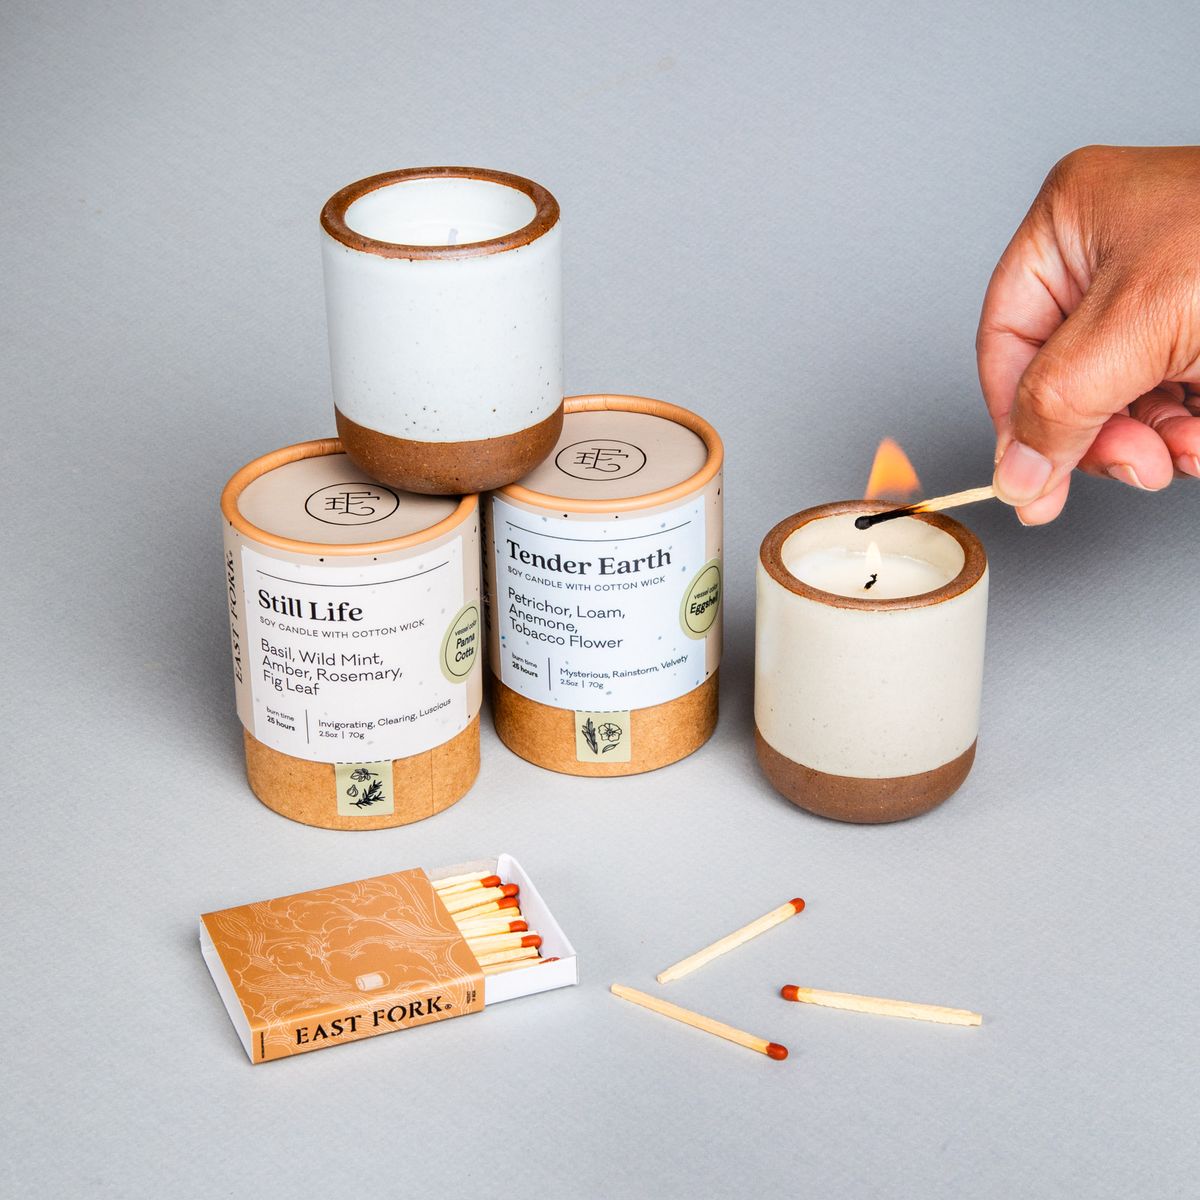 Two small ceramic vessels in cream off-white and cool white colors with candles inside each are gathered next to their cardboard packaging tubes with matches. A hand is lighting the cream candle.